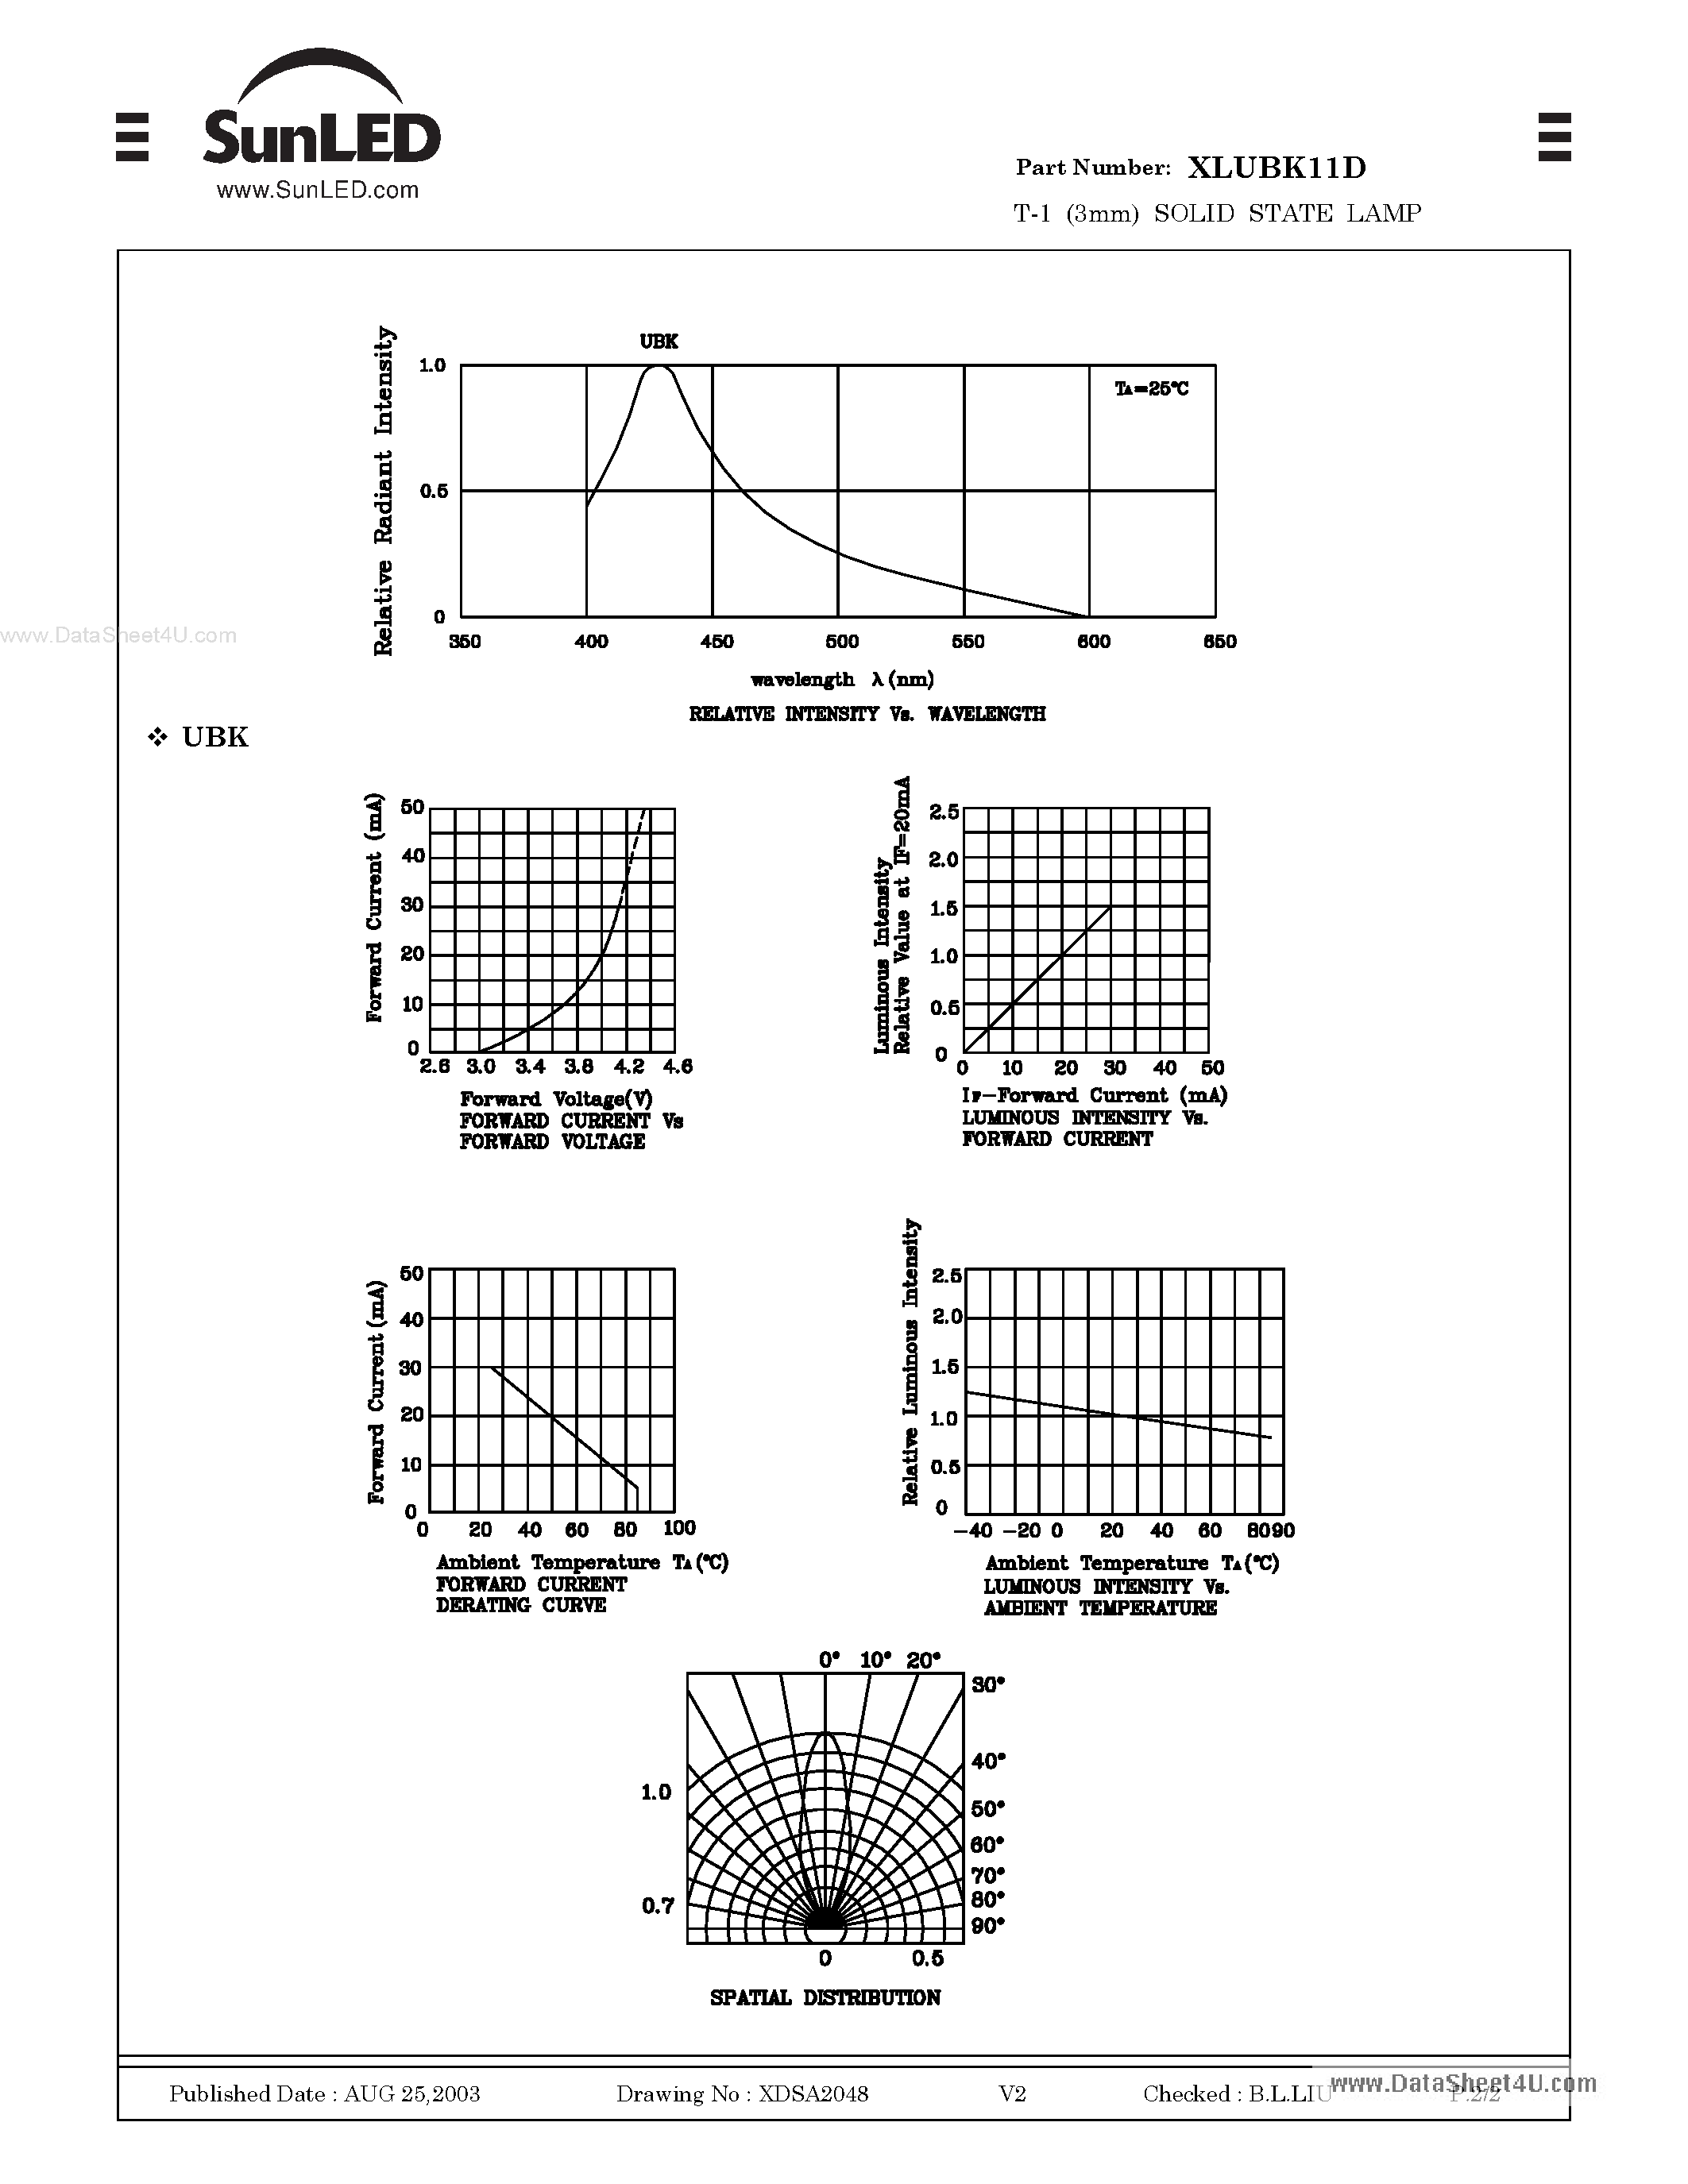 Datasheet XLUBK11D - T-1 (3mm) SOLID STATE LAMP page 2